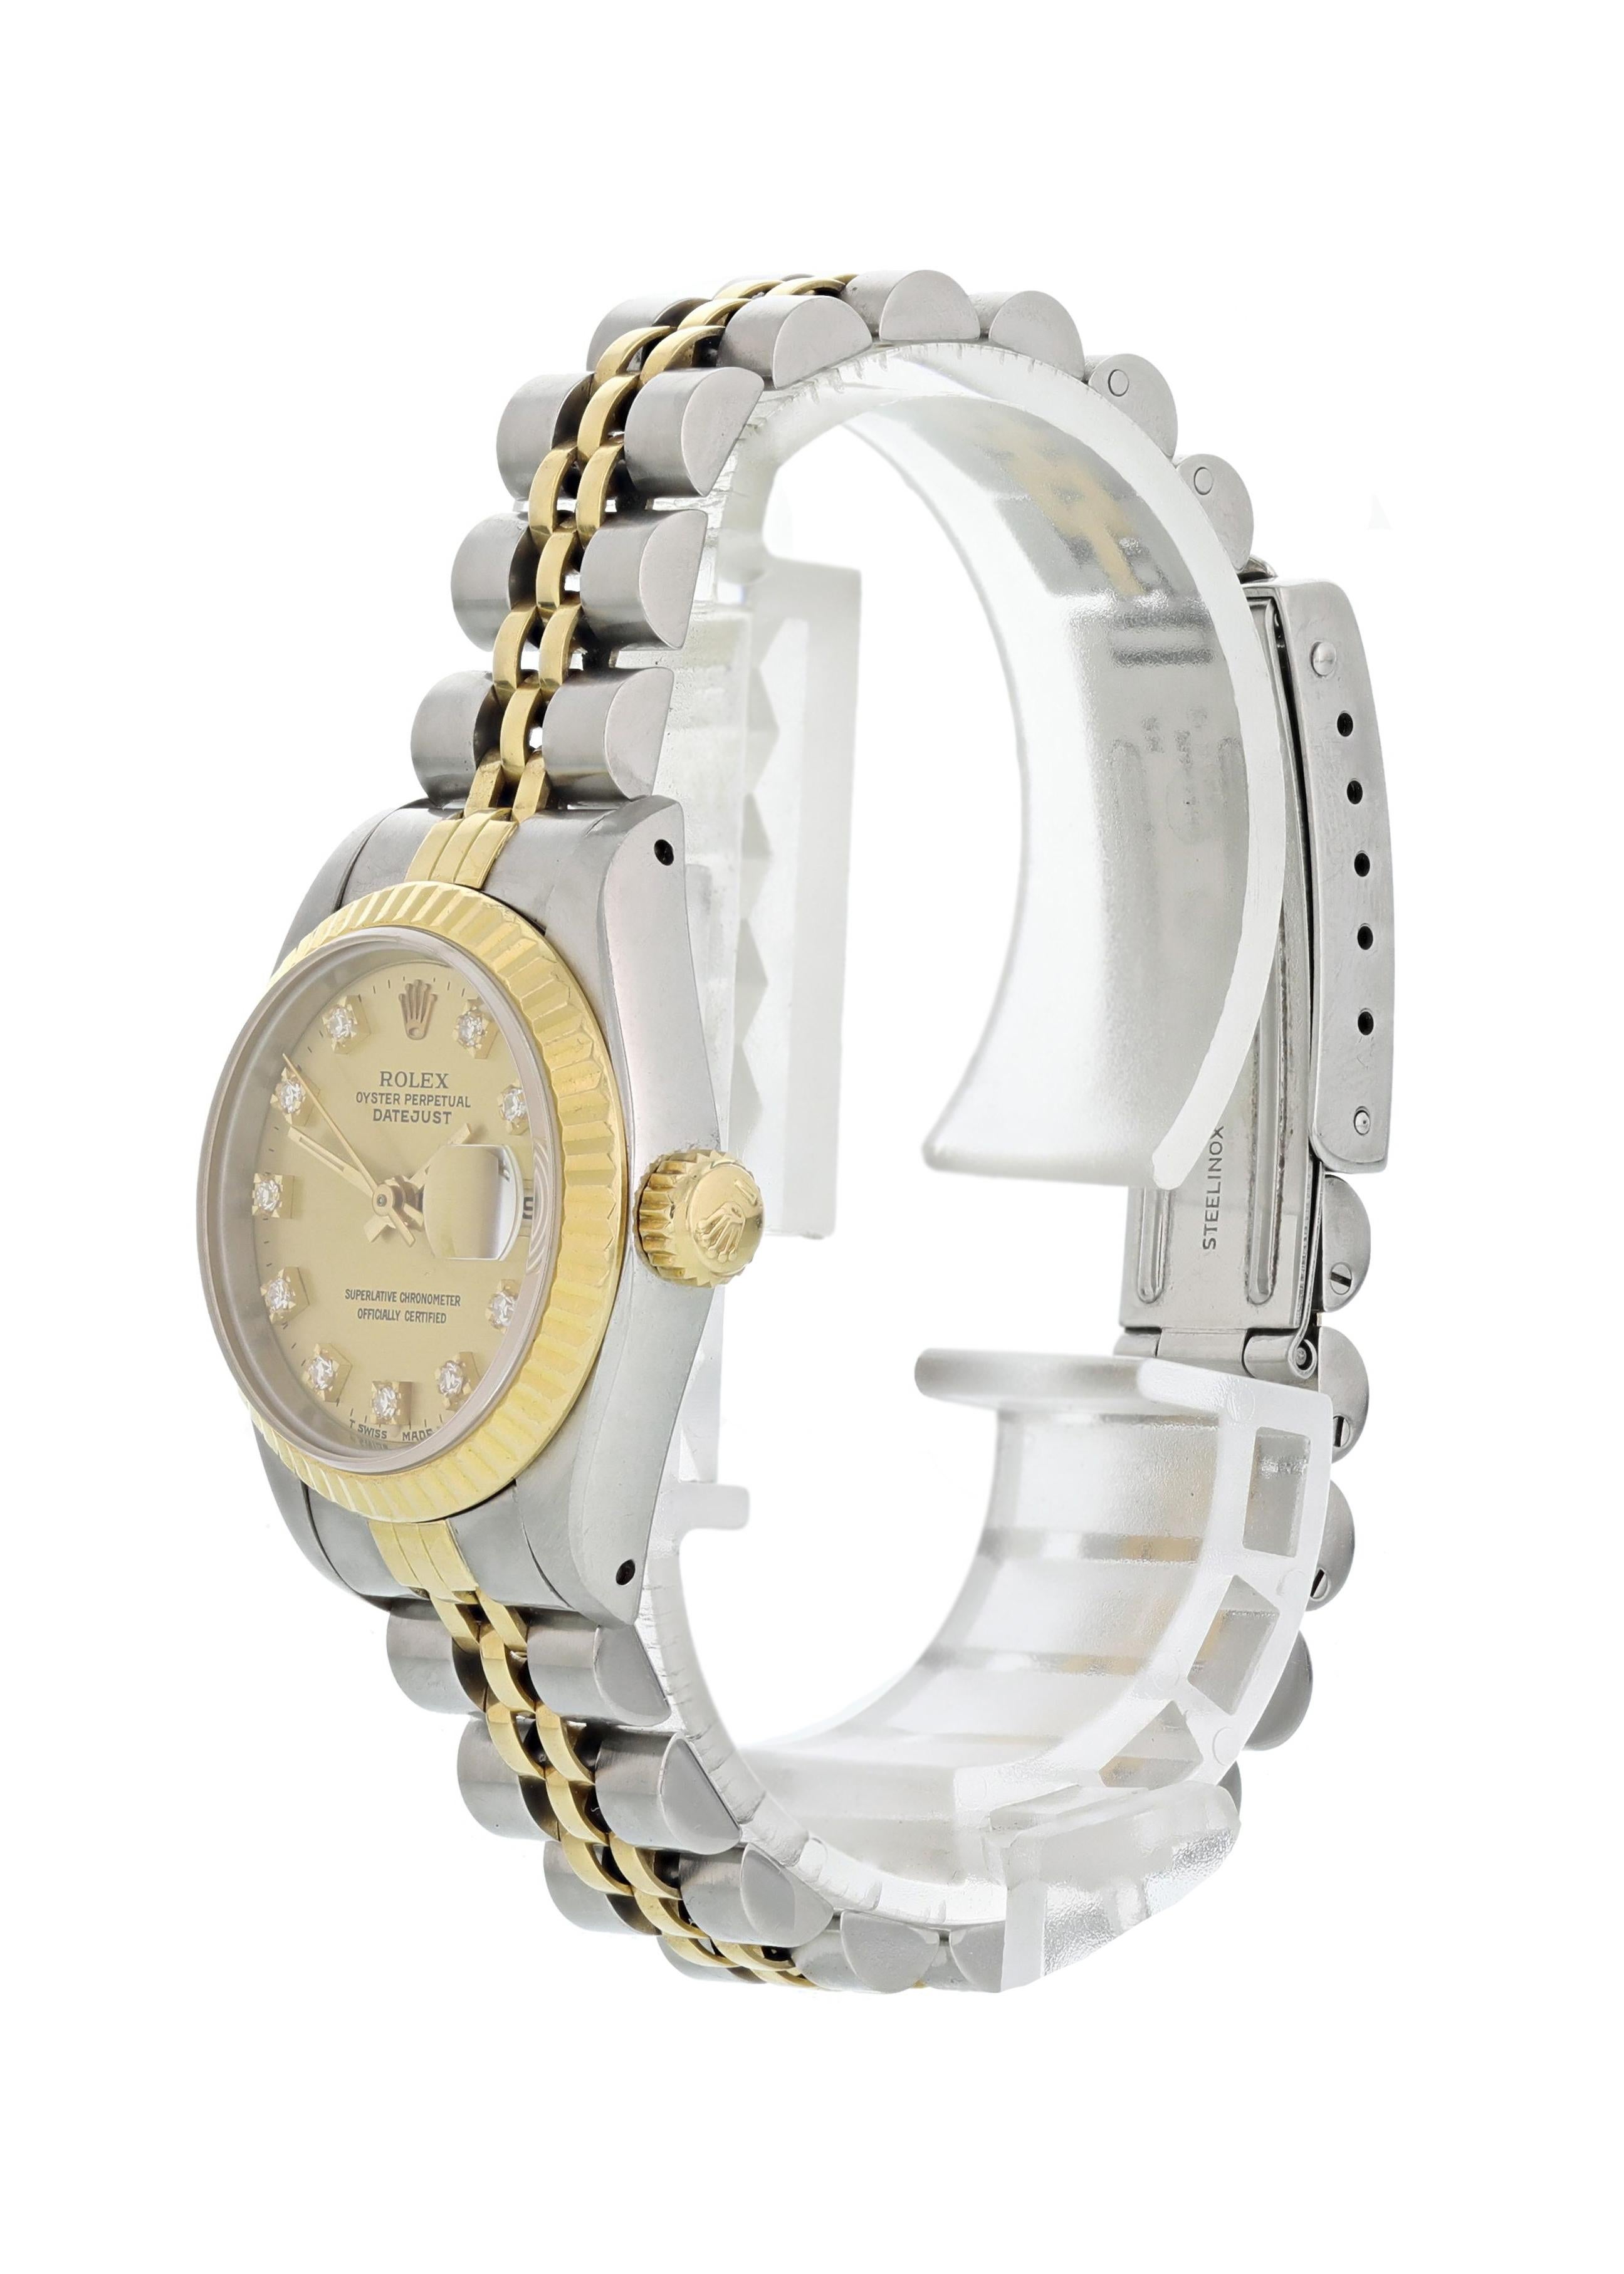 Rolex Datejust Professional 69173 Ladies Watch. 
26mm Stainless Steel case. 
Yellow Gold Stationary bezel. 
Champagne dial with Luminous gold hands and Factory placed diamond hour markers. 
Minute markers on the outer dial. 
Date display at the 3